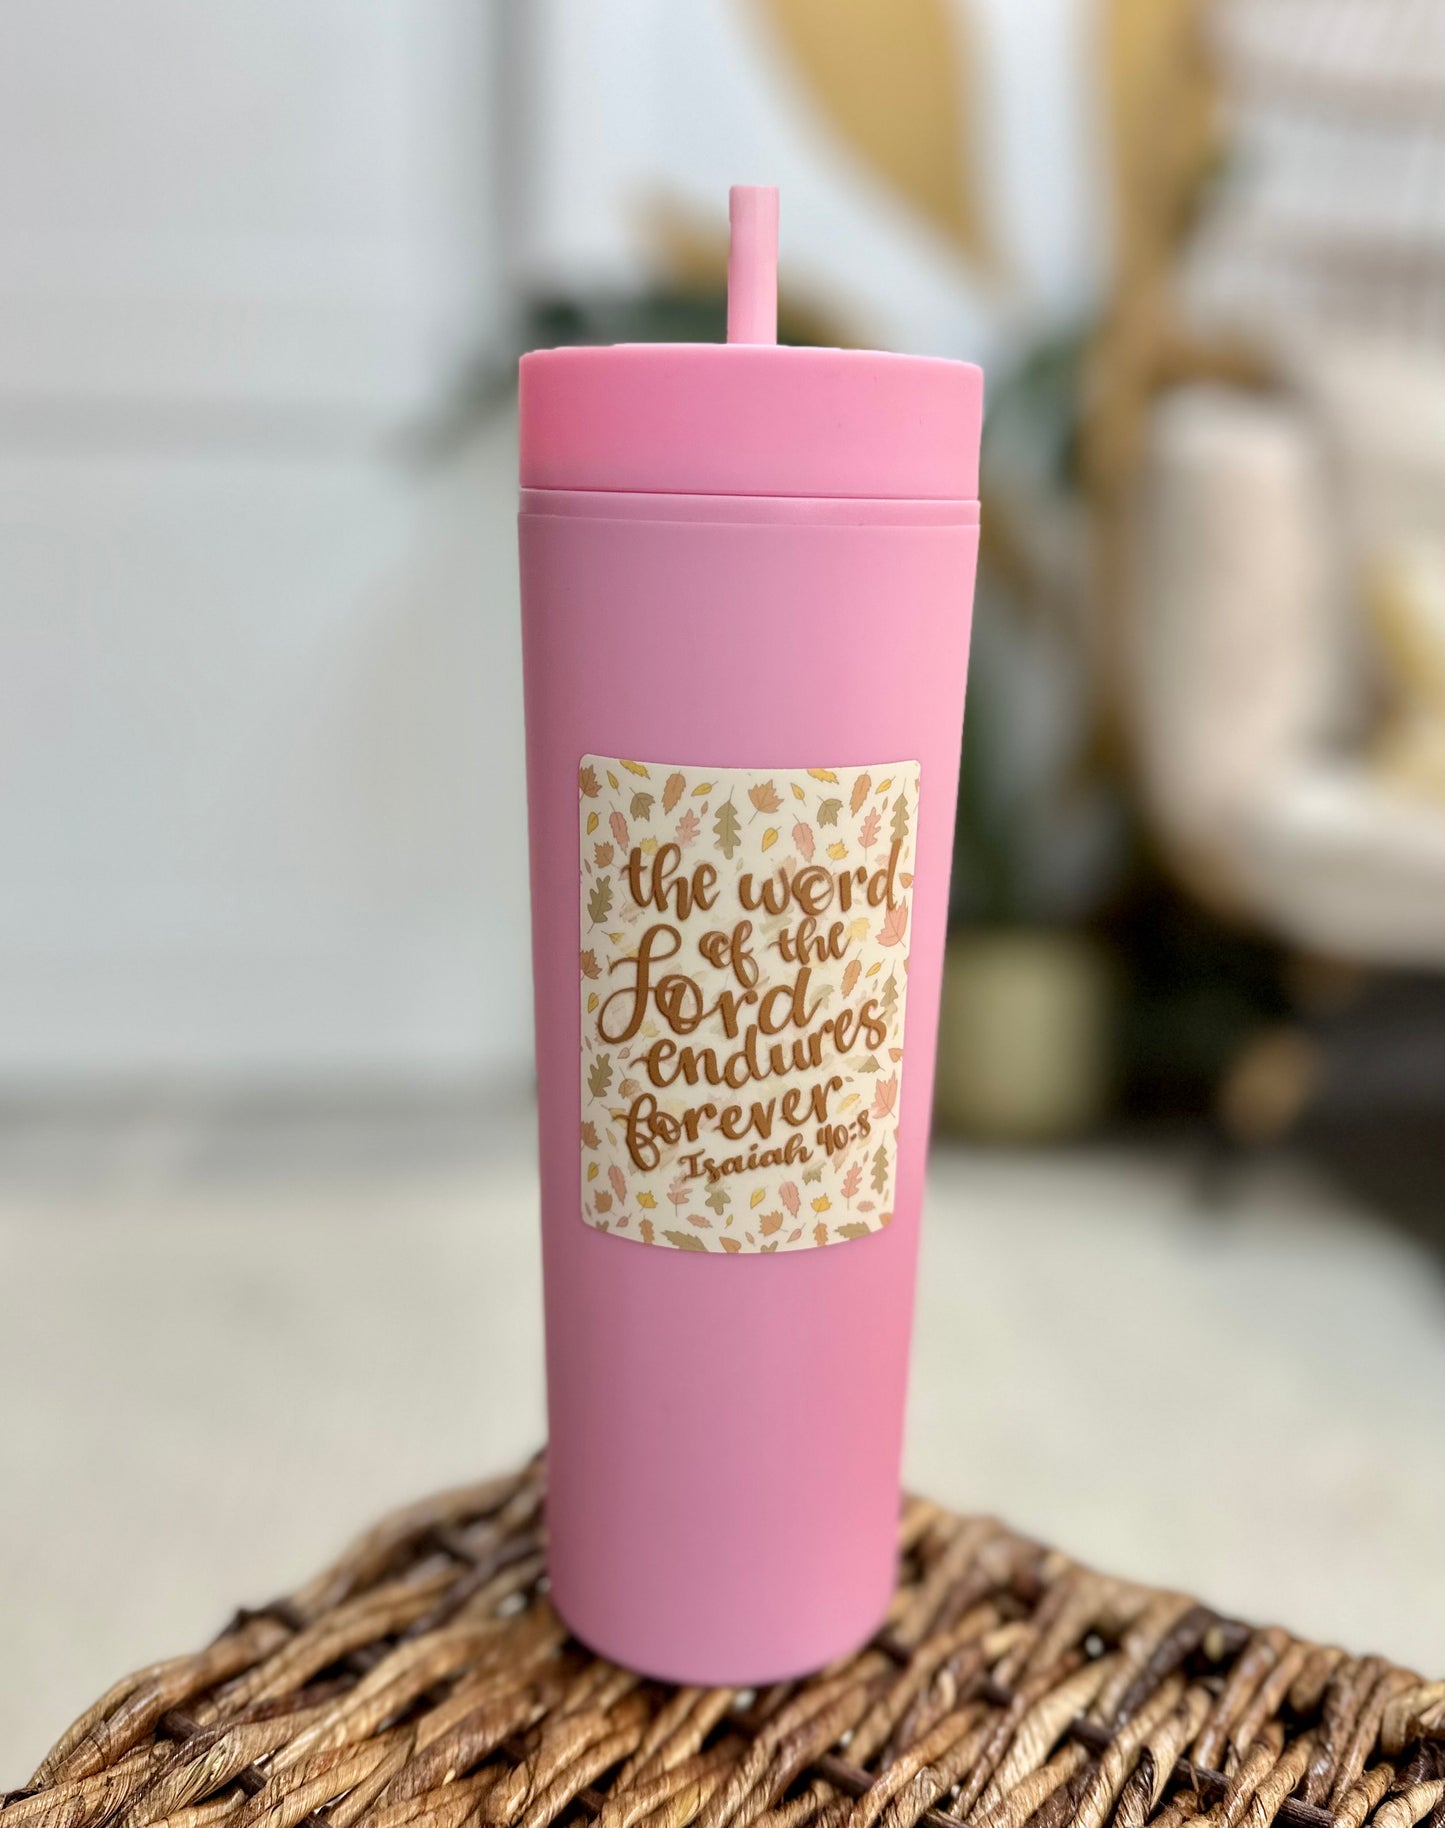 Pink Tumbler with Straw